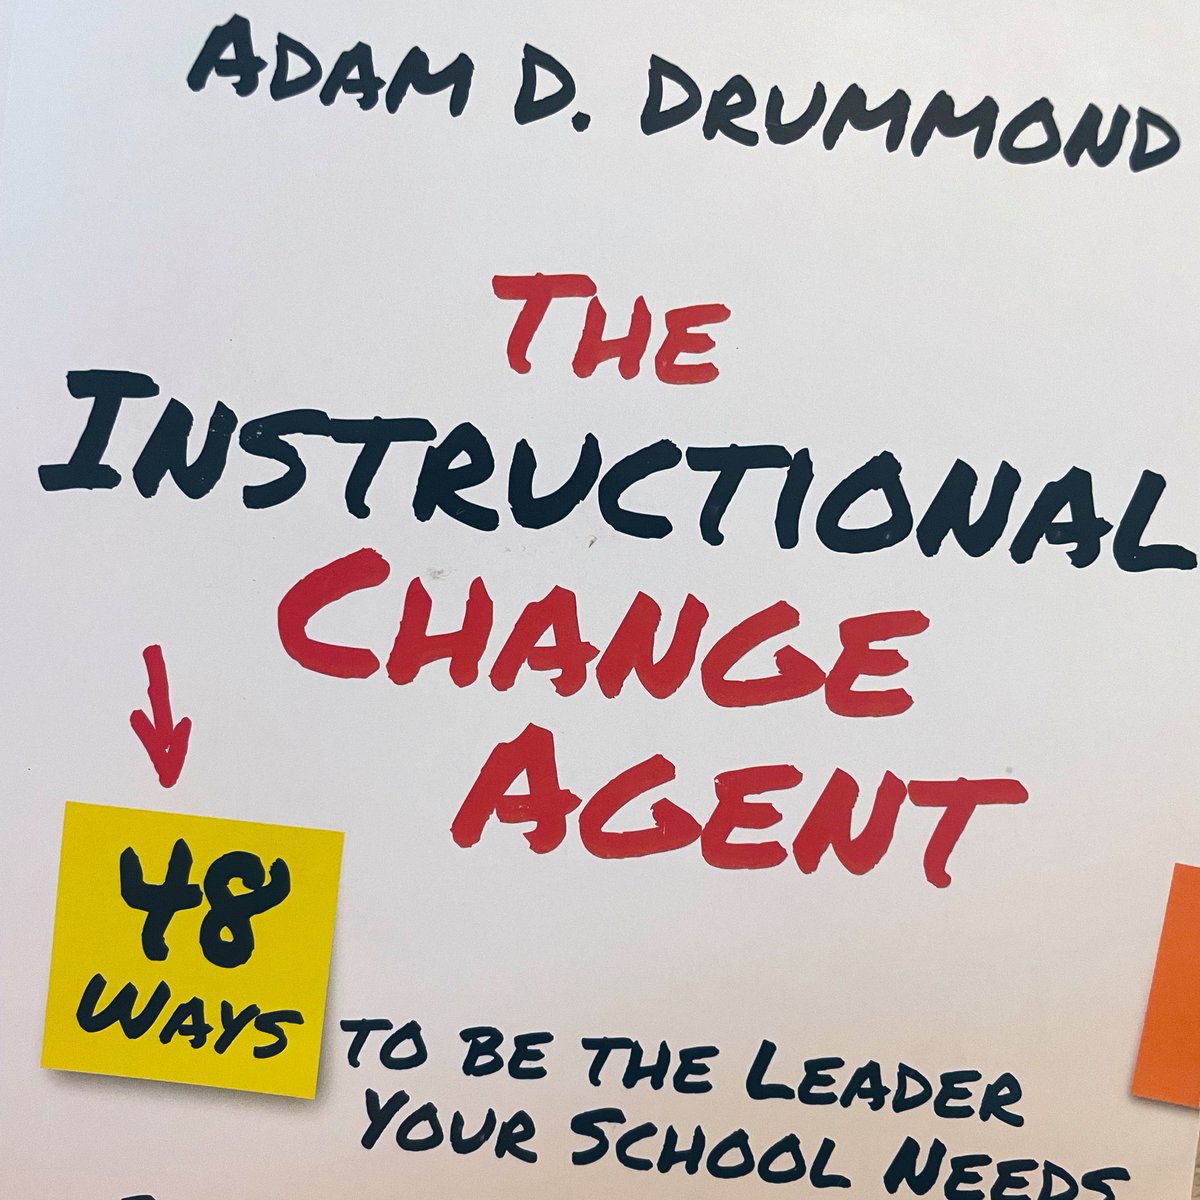 When your PoP focus is Ss engagement and you’re reading @adamddrummond’s book. 🤩 This is a GREAT read, Dr. D! @BaylorSOE #JoyfulLeaders #edleaders @RigorRelevance